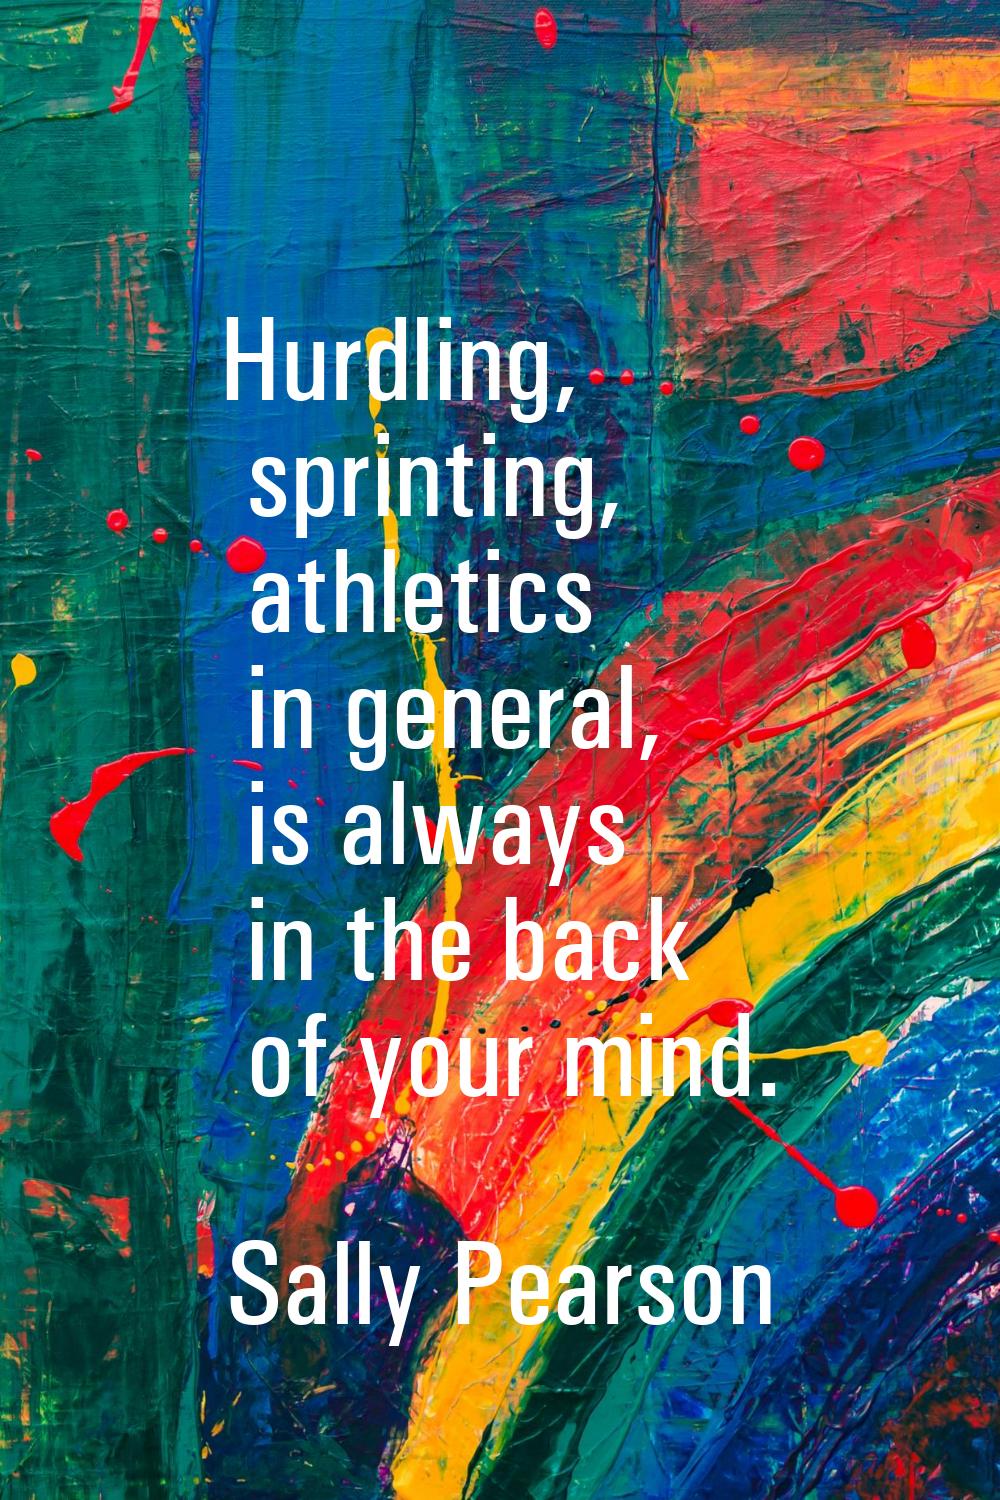 Hurdling, sprinting, athletics in general, is always in the back of your mind.